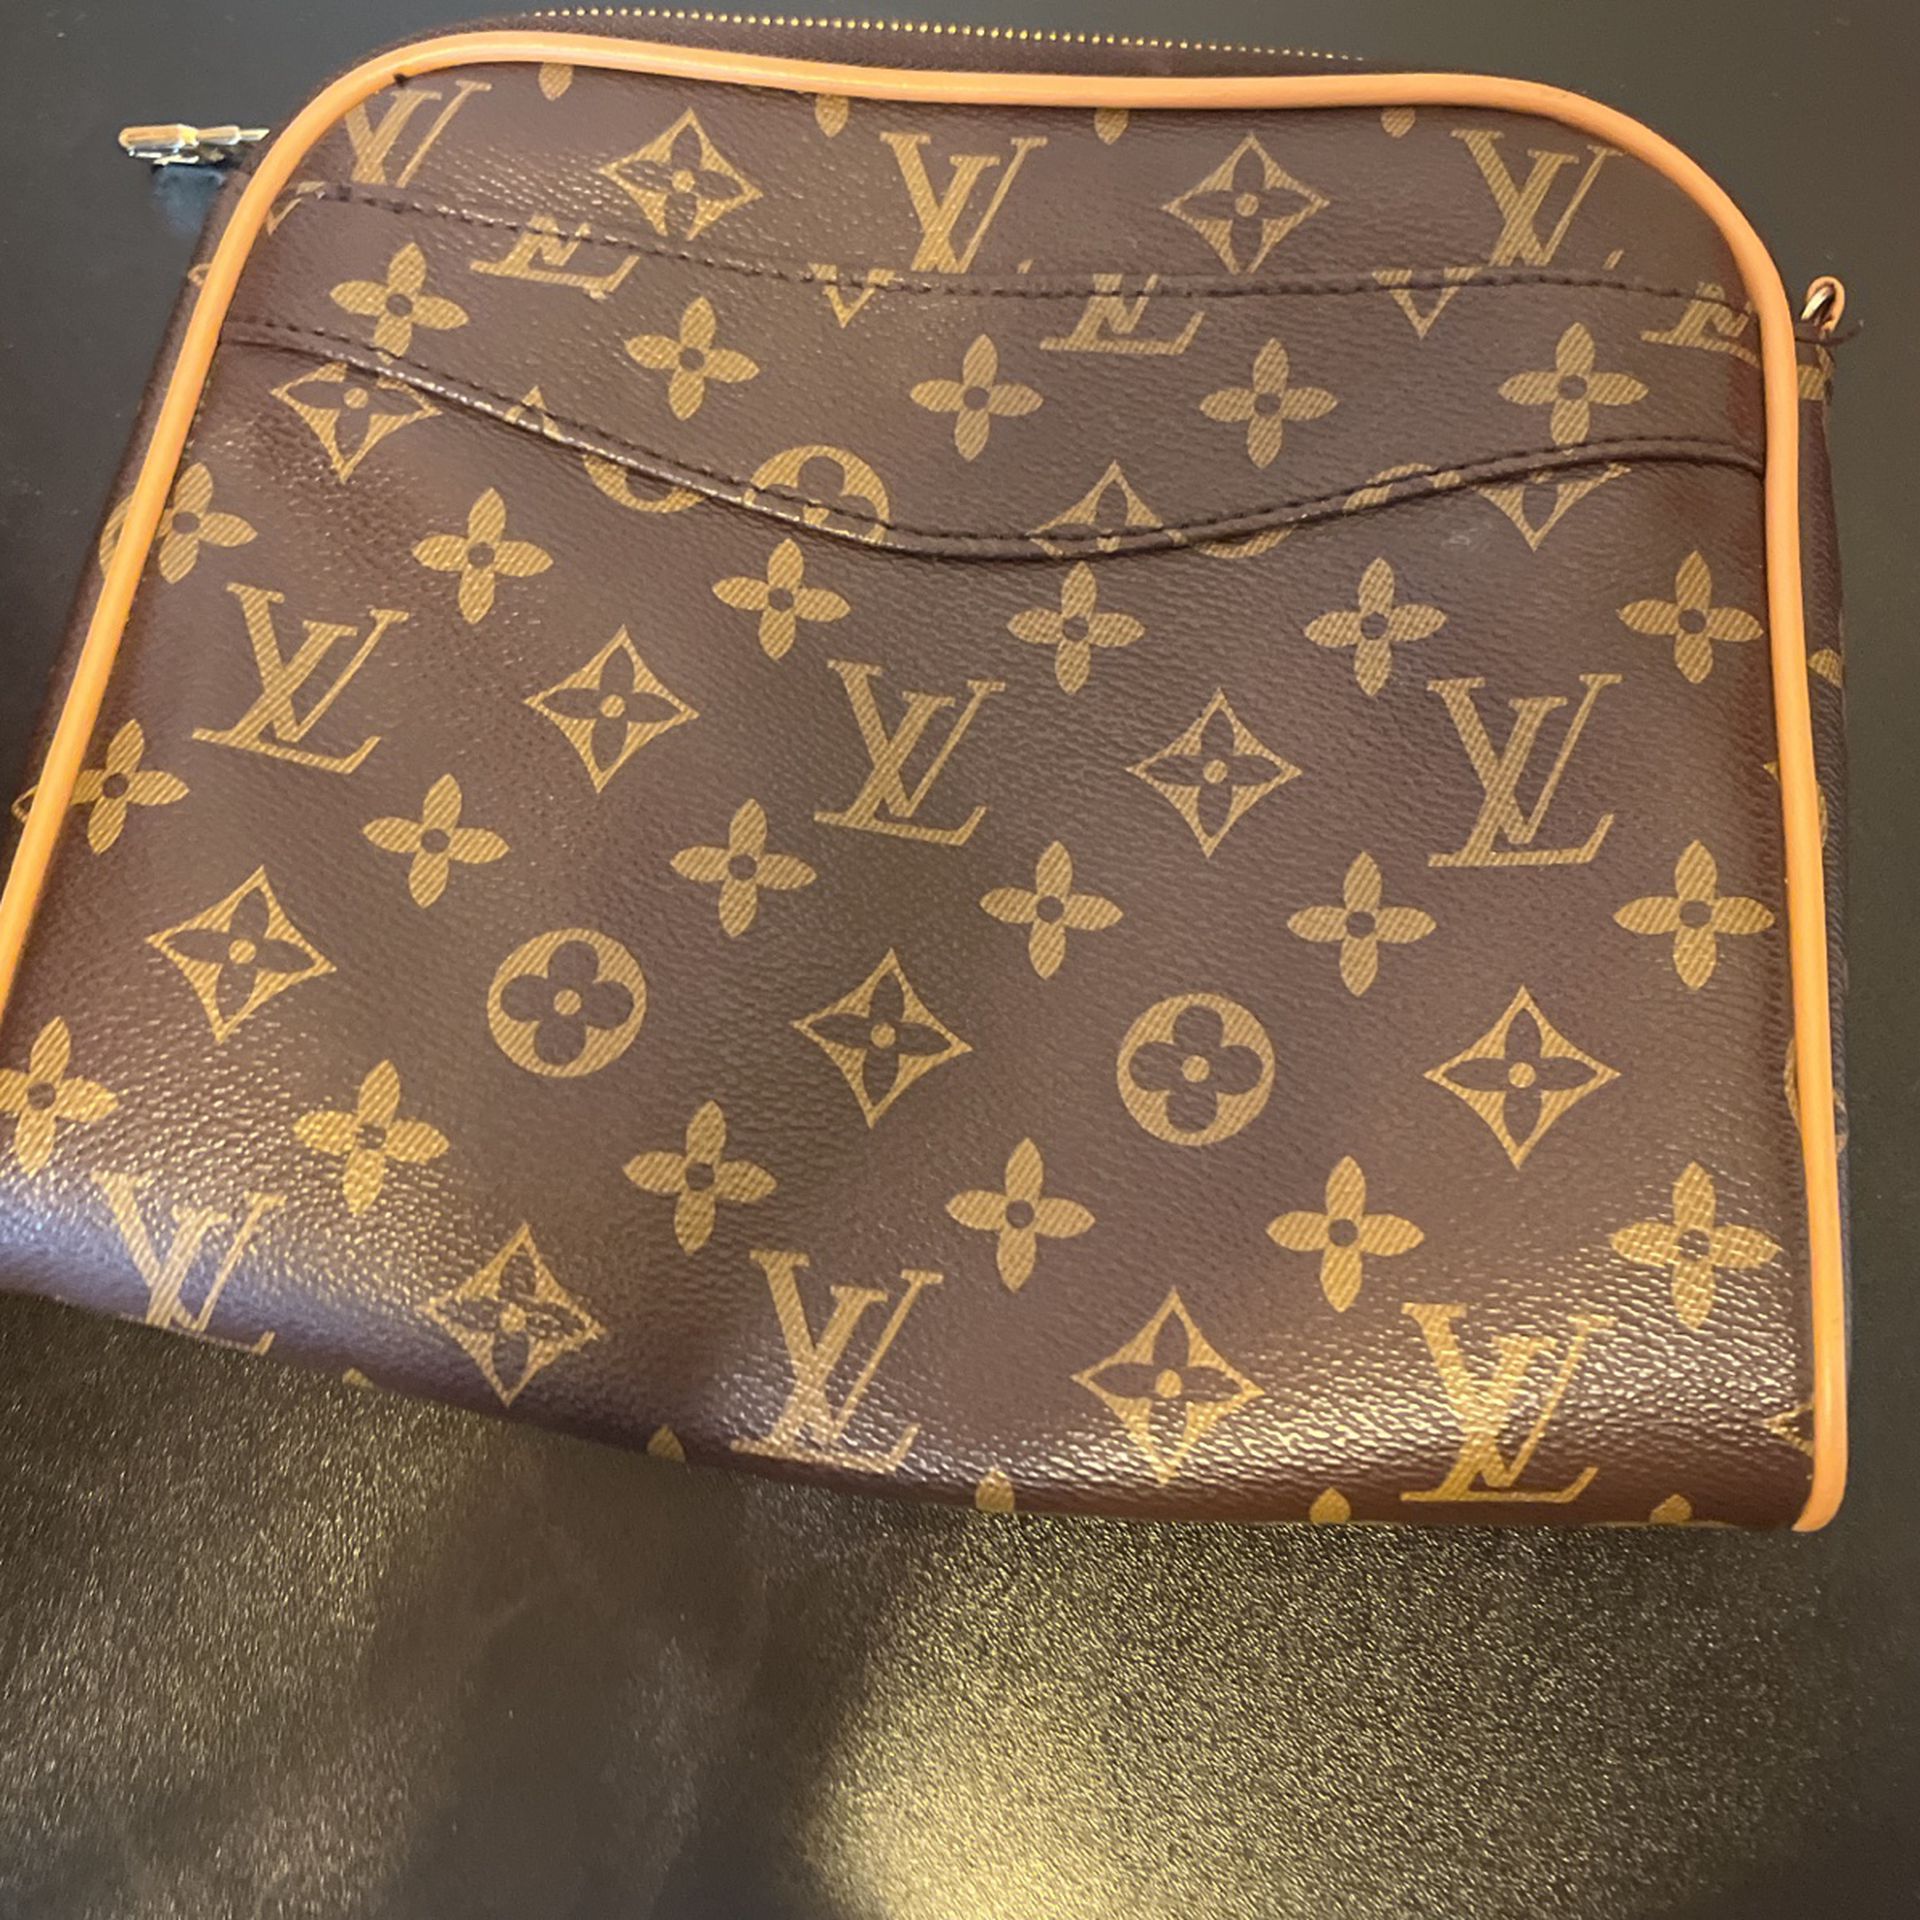 Lv Bag I Got It As A Hand Me Down I Don't Know If Real Or Fake The Price Is  Just If It's Real for Sale in Riverside, CA - OfferUp